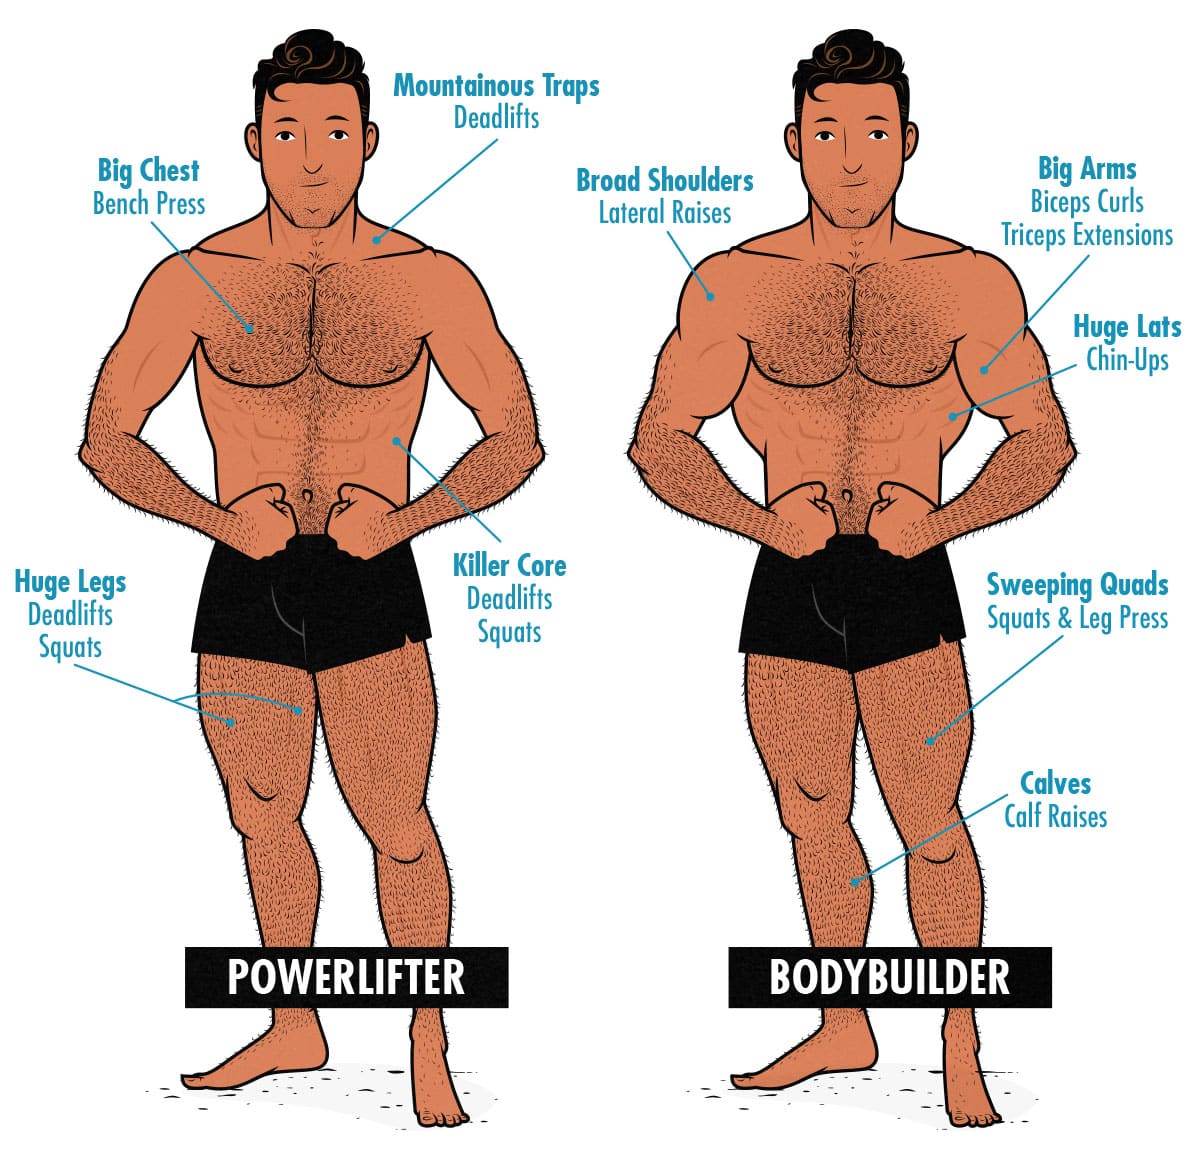 Illustration showing the difference between a bodybuilder and a powerlifter.